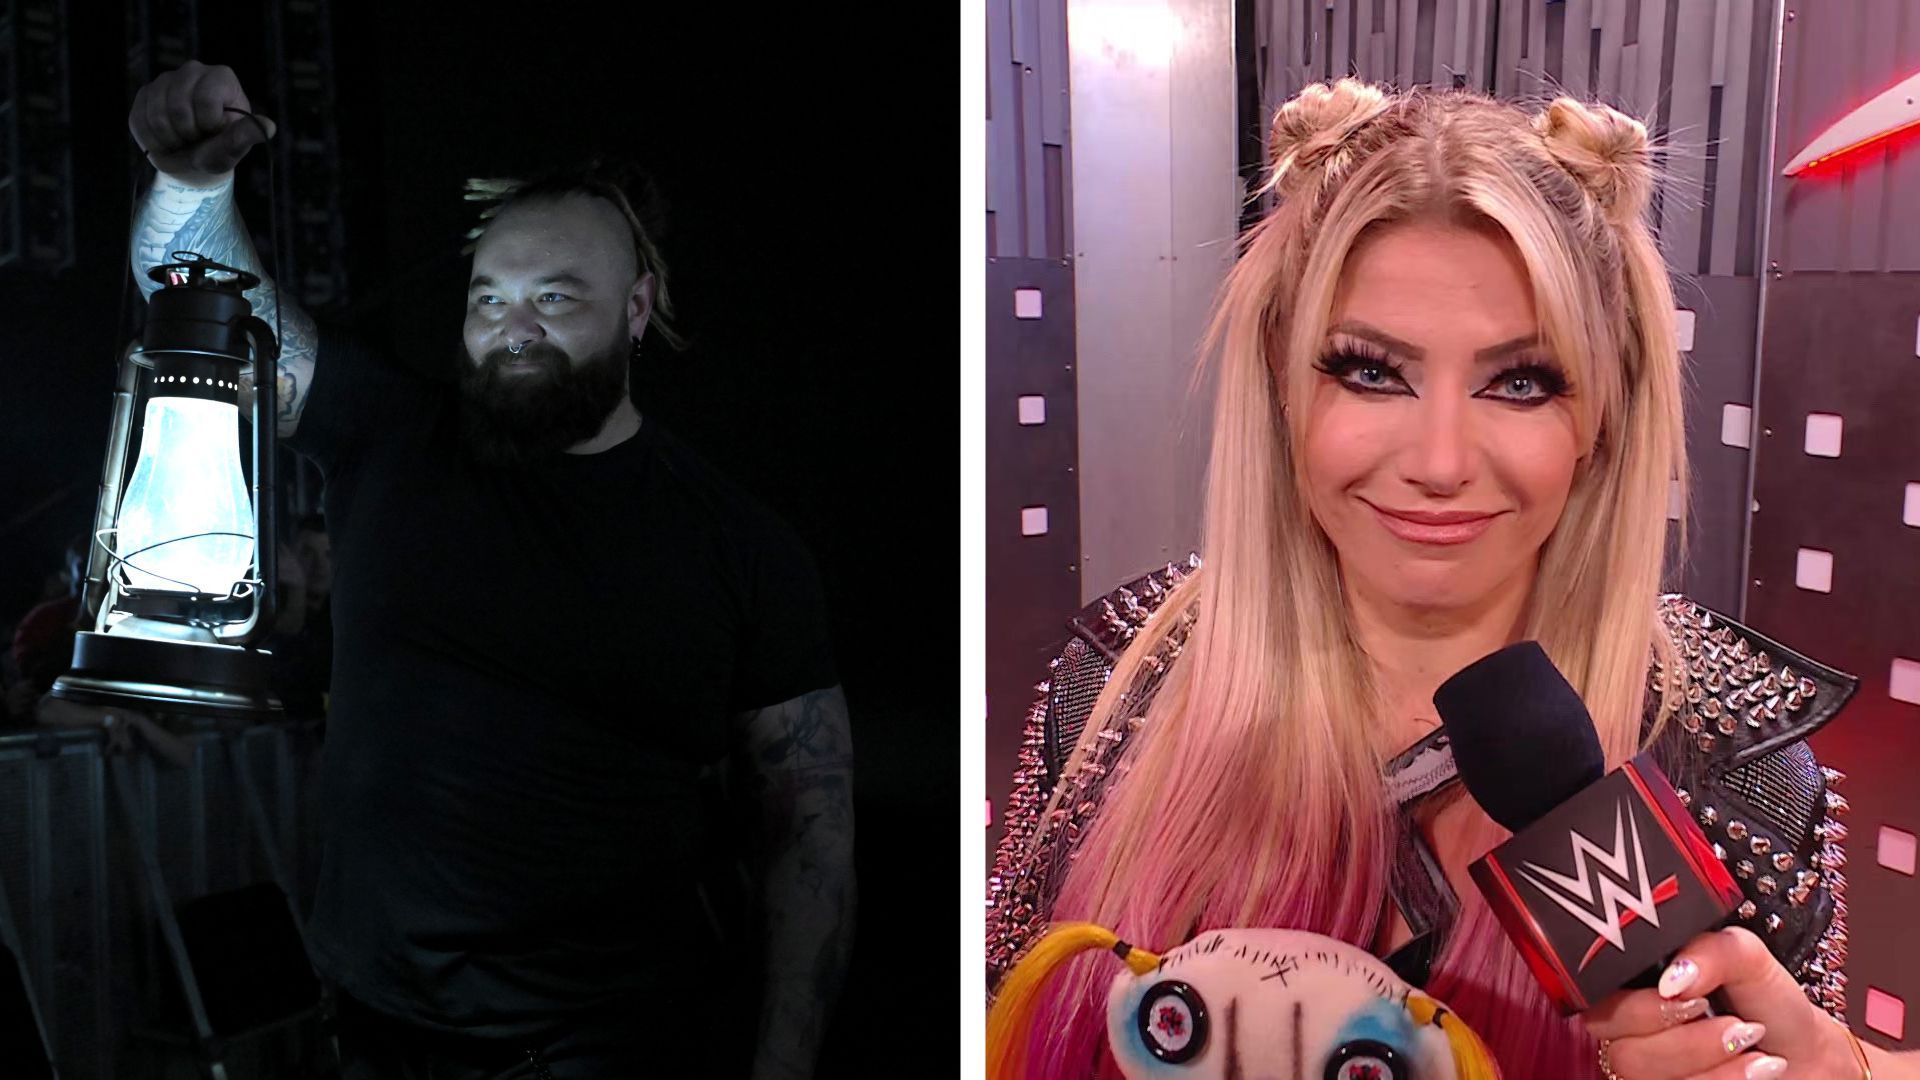 Alexa Bliss will seemingly be unable to reunite with Bray Wyatt on WWE programming